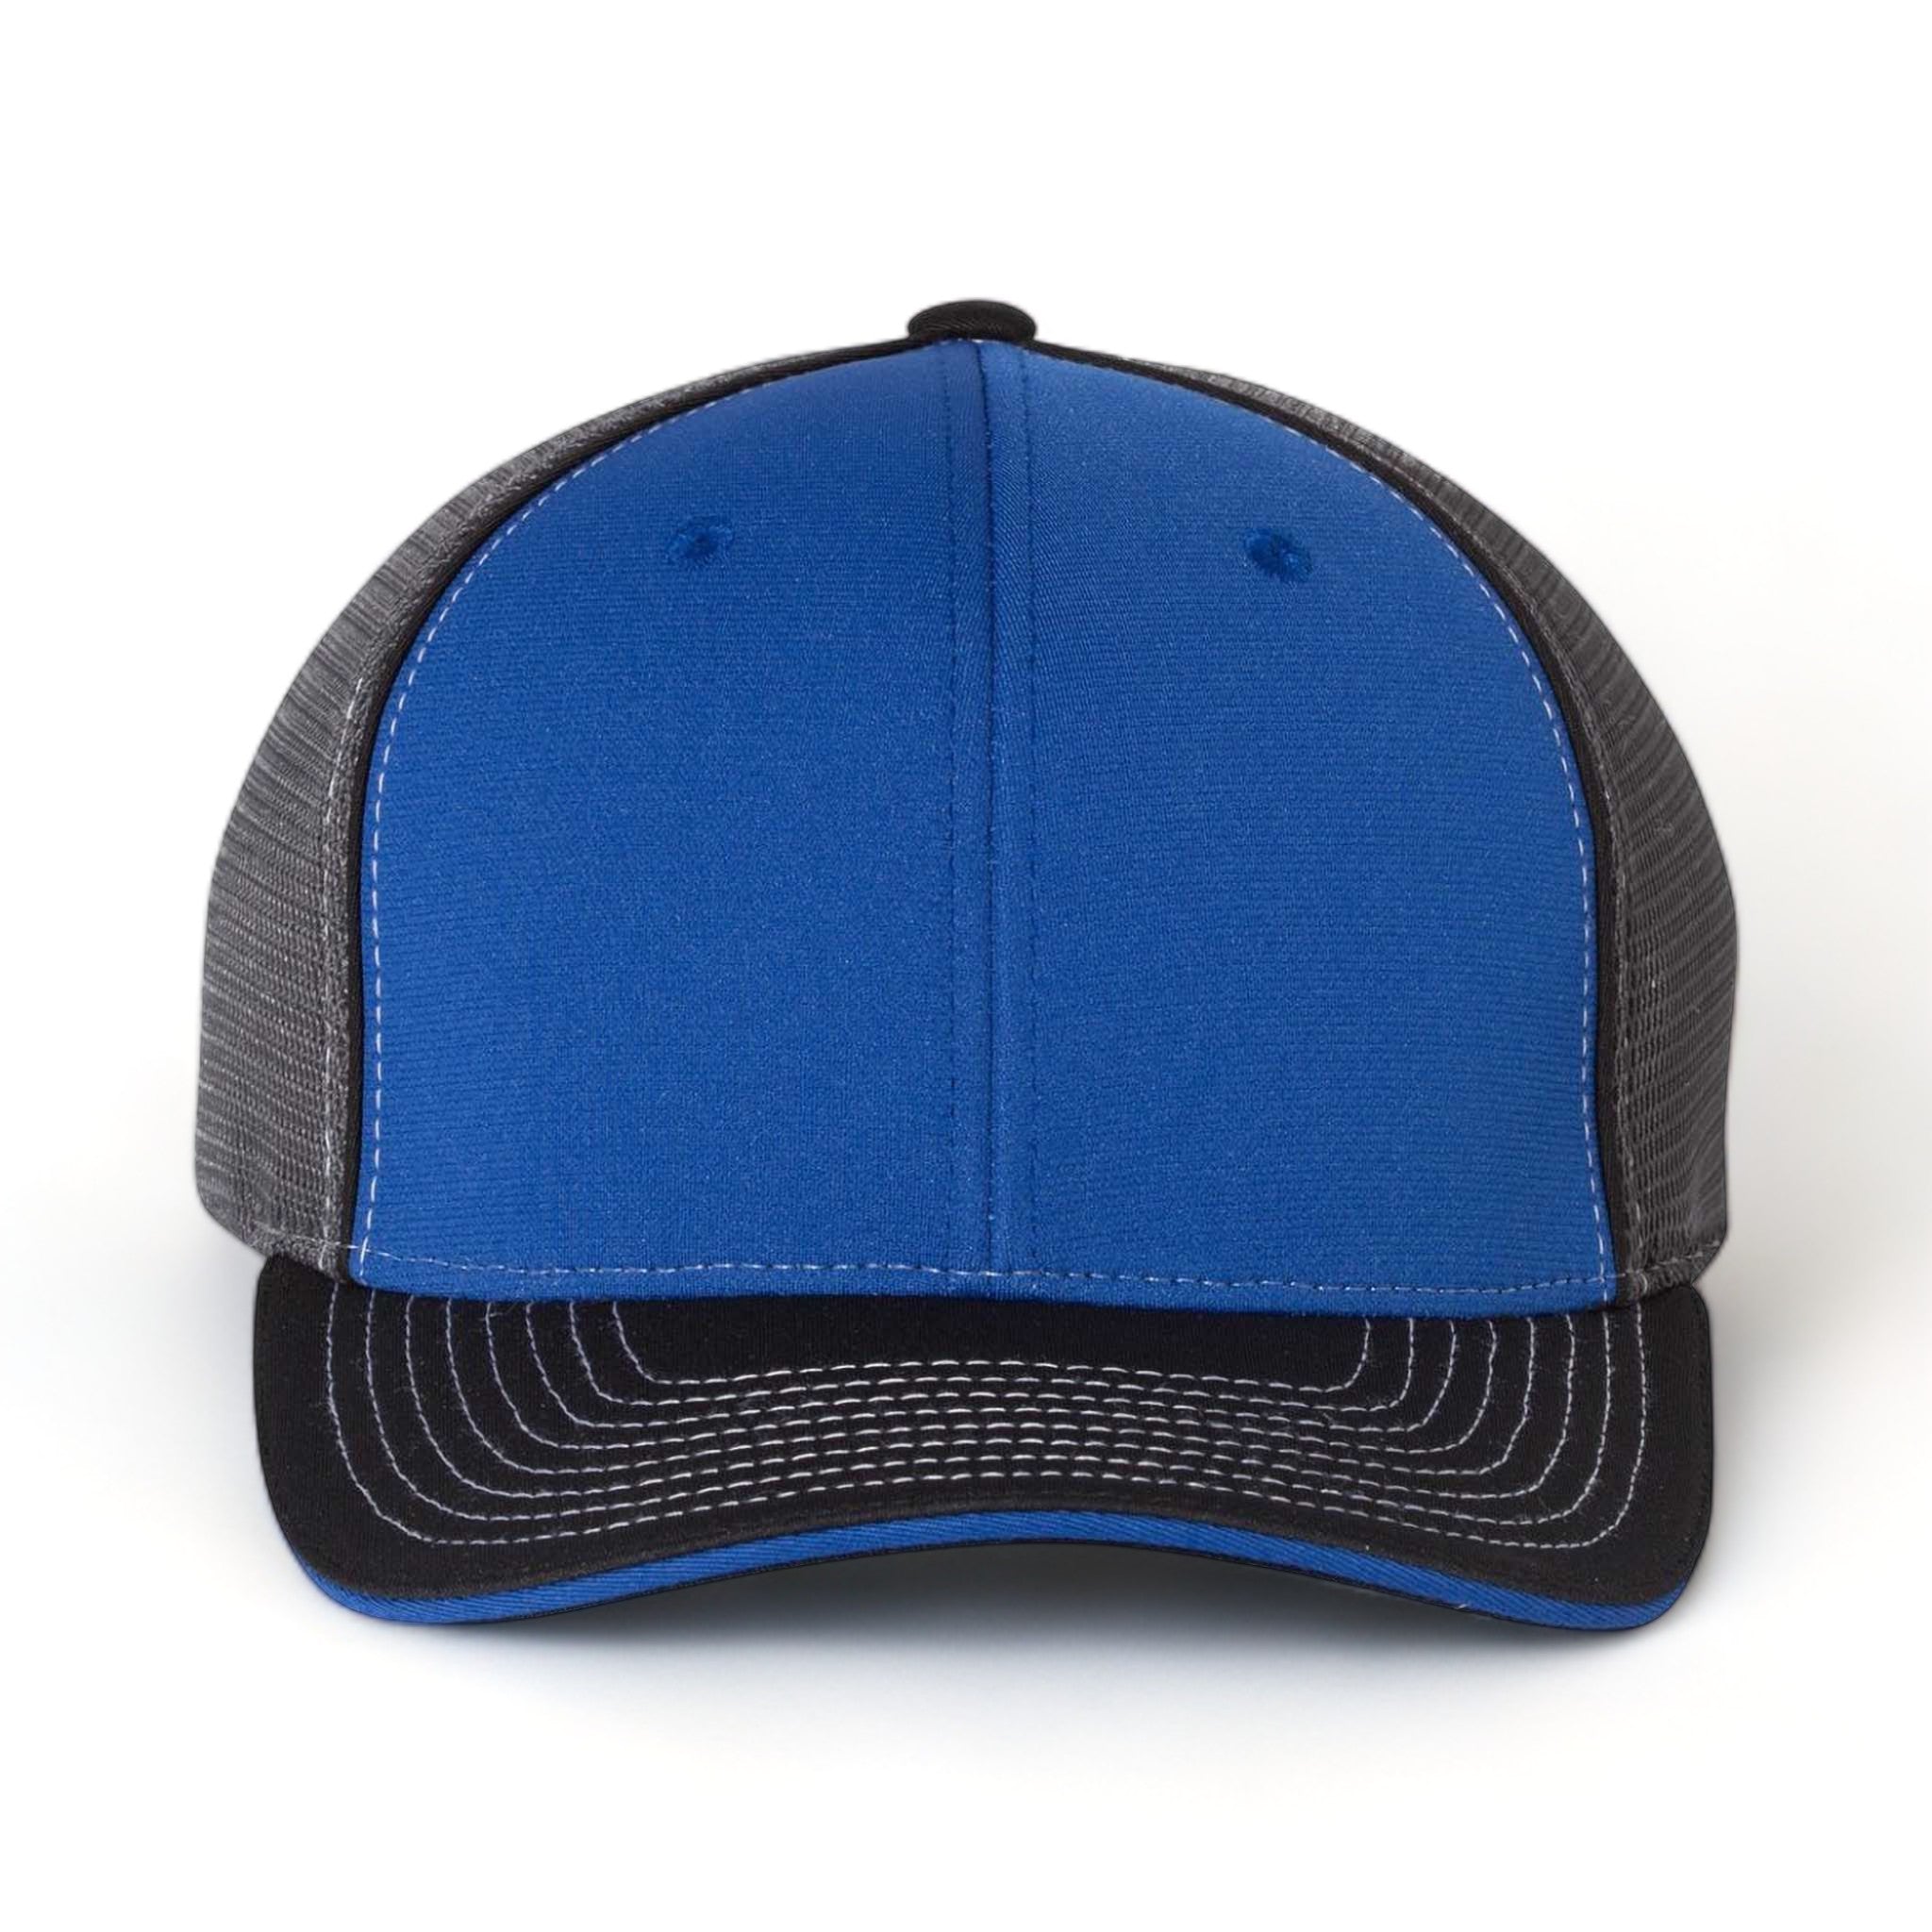 Front view of Richardson 172 custom hat in royal, charcoal and black tri